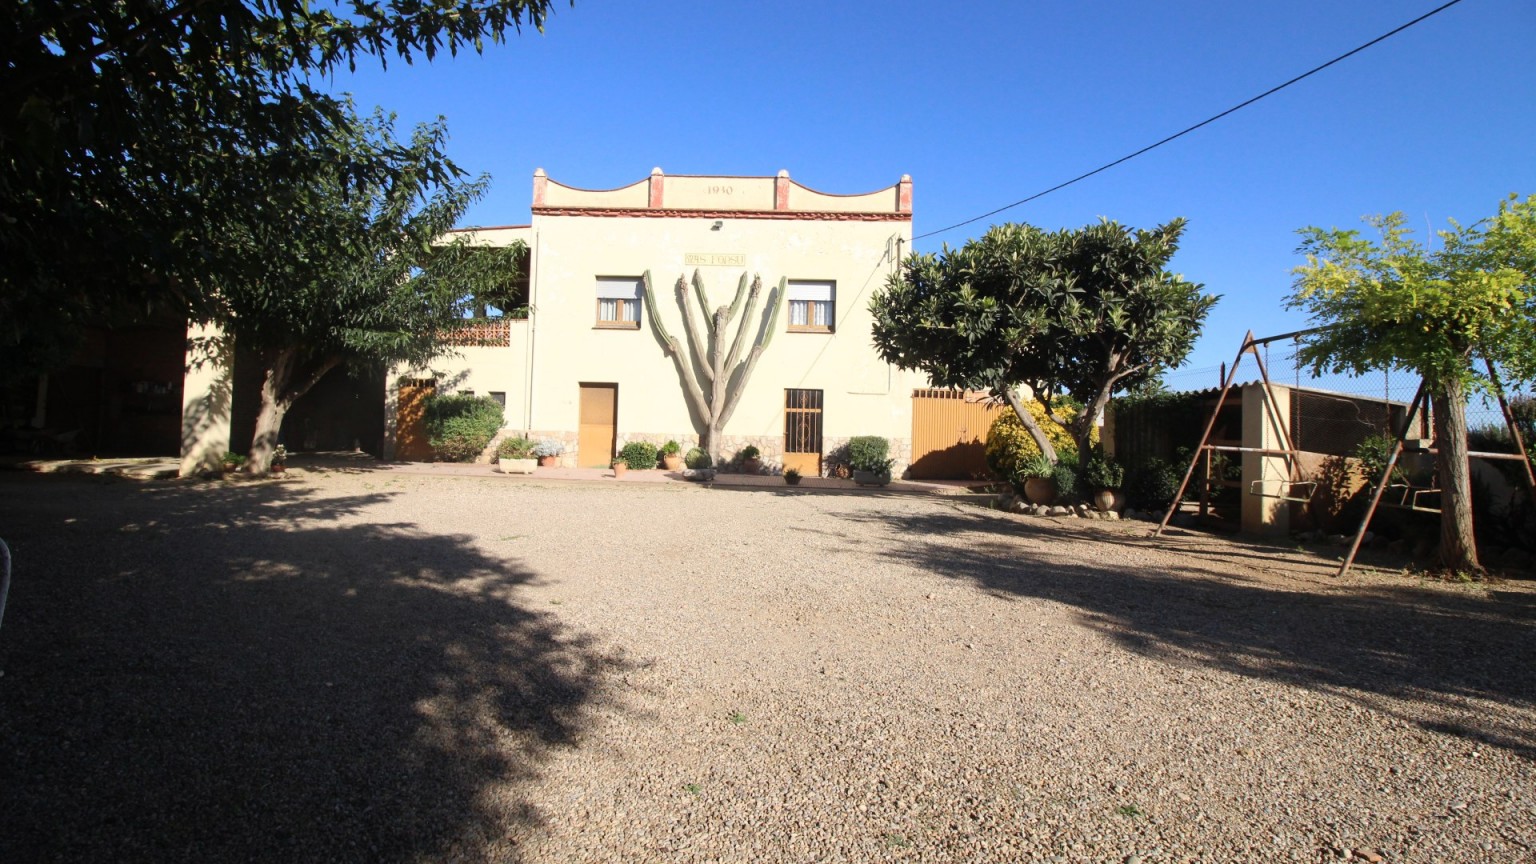 Country house for sale, located in Vilafant with land of 15.309m² and a farm.